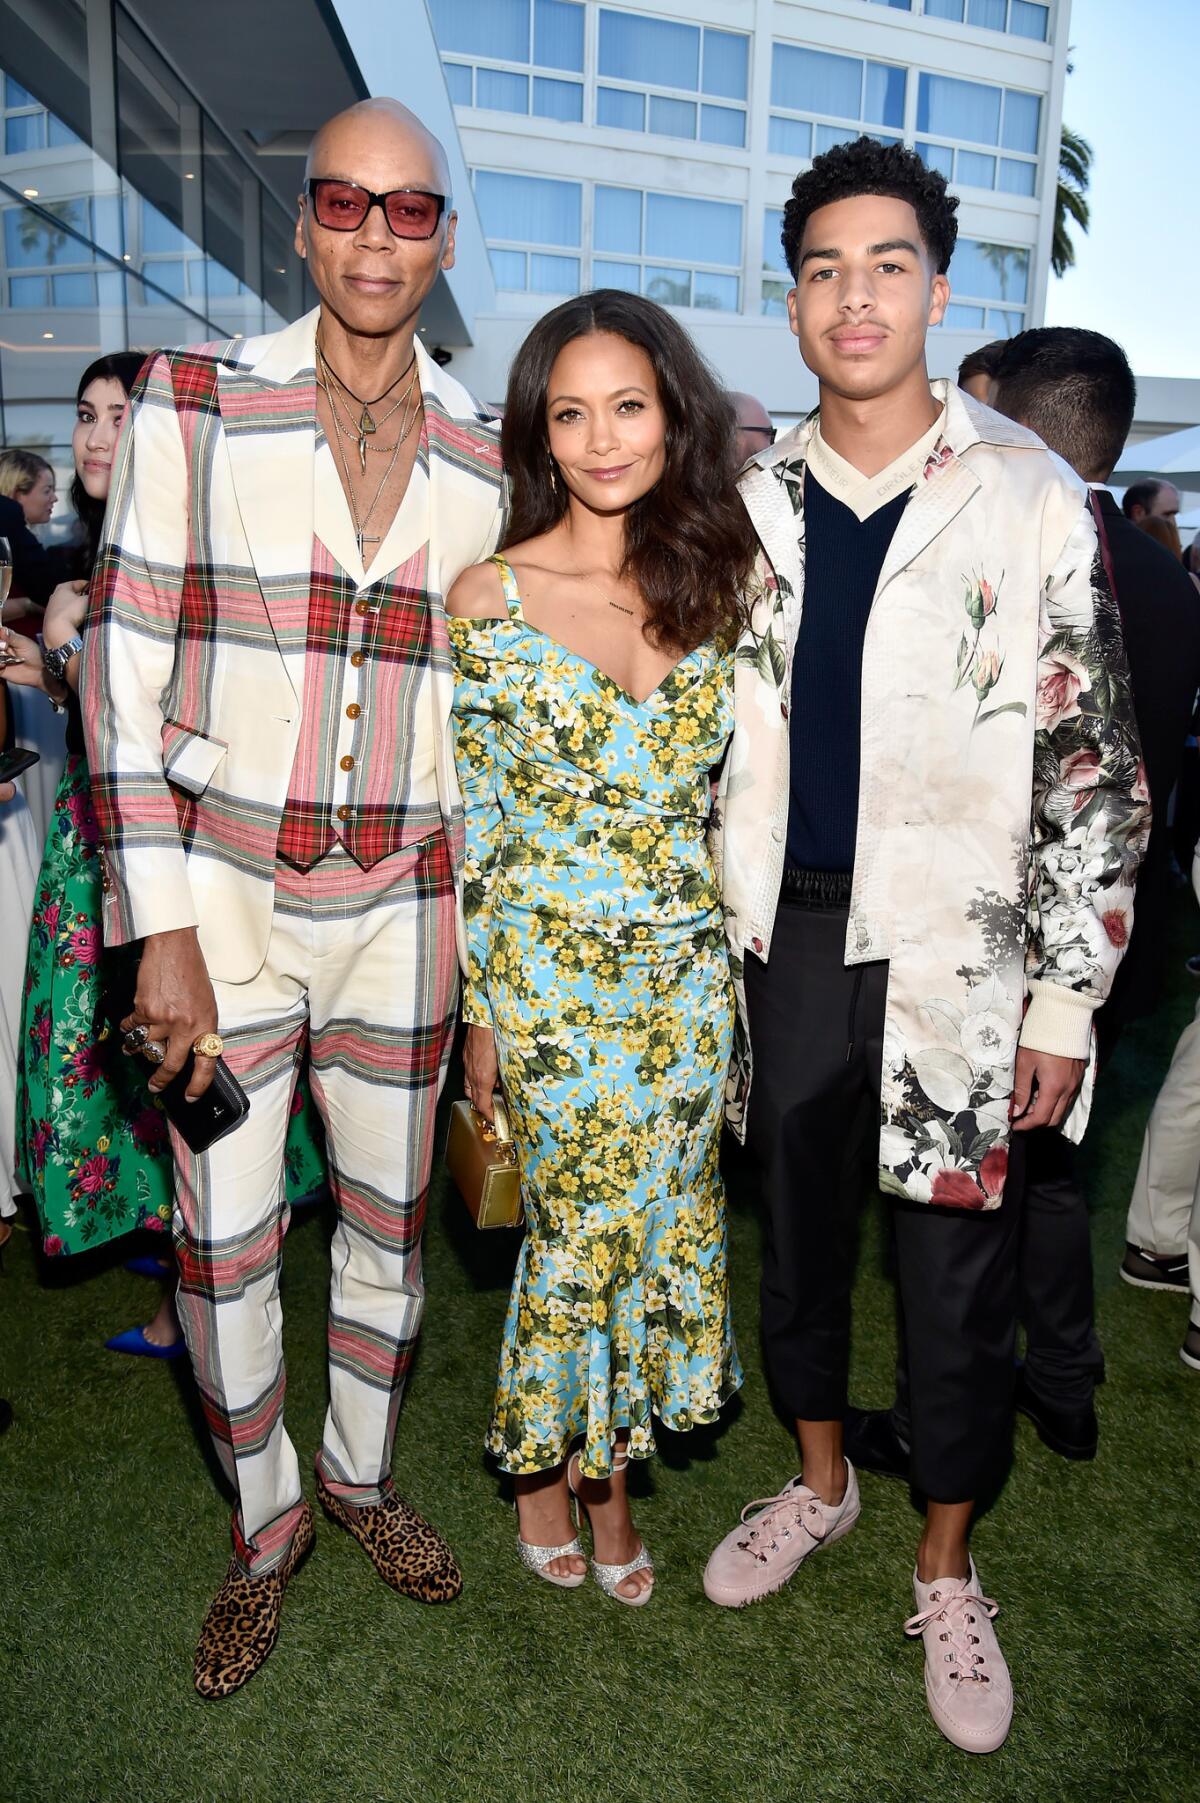 RuPaul, Thandie Newton and Marcus Scribner pose together at the tea party.